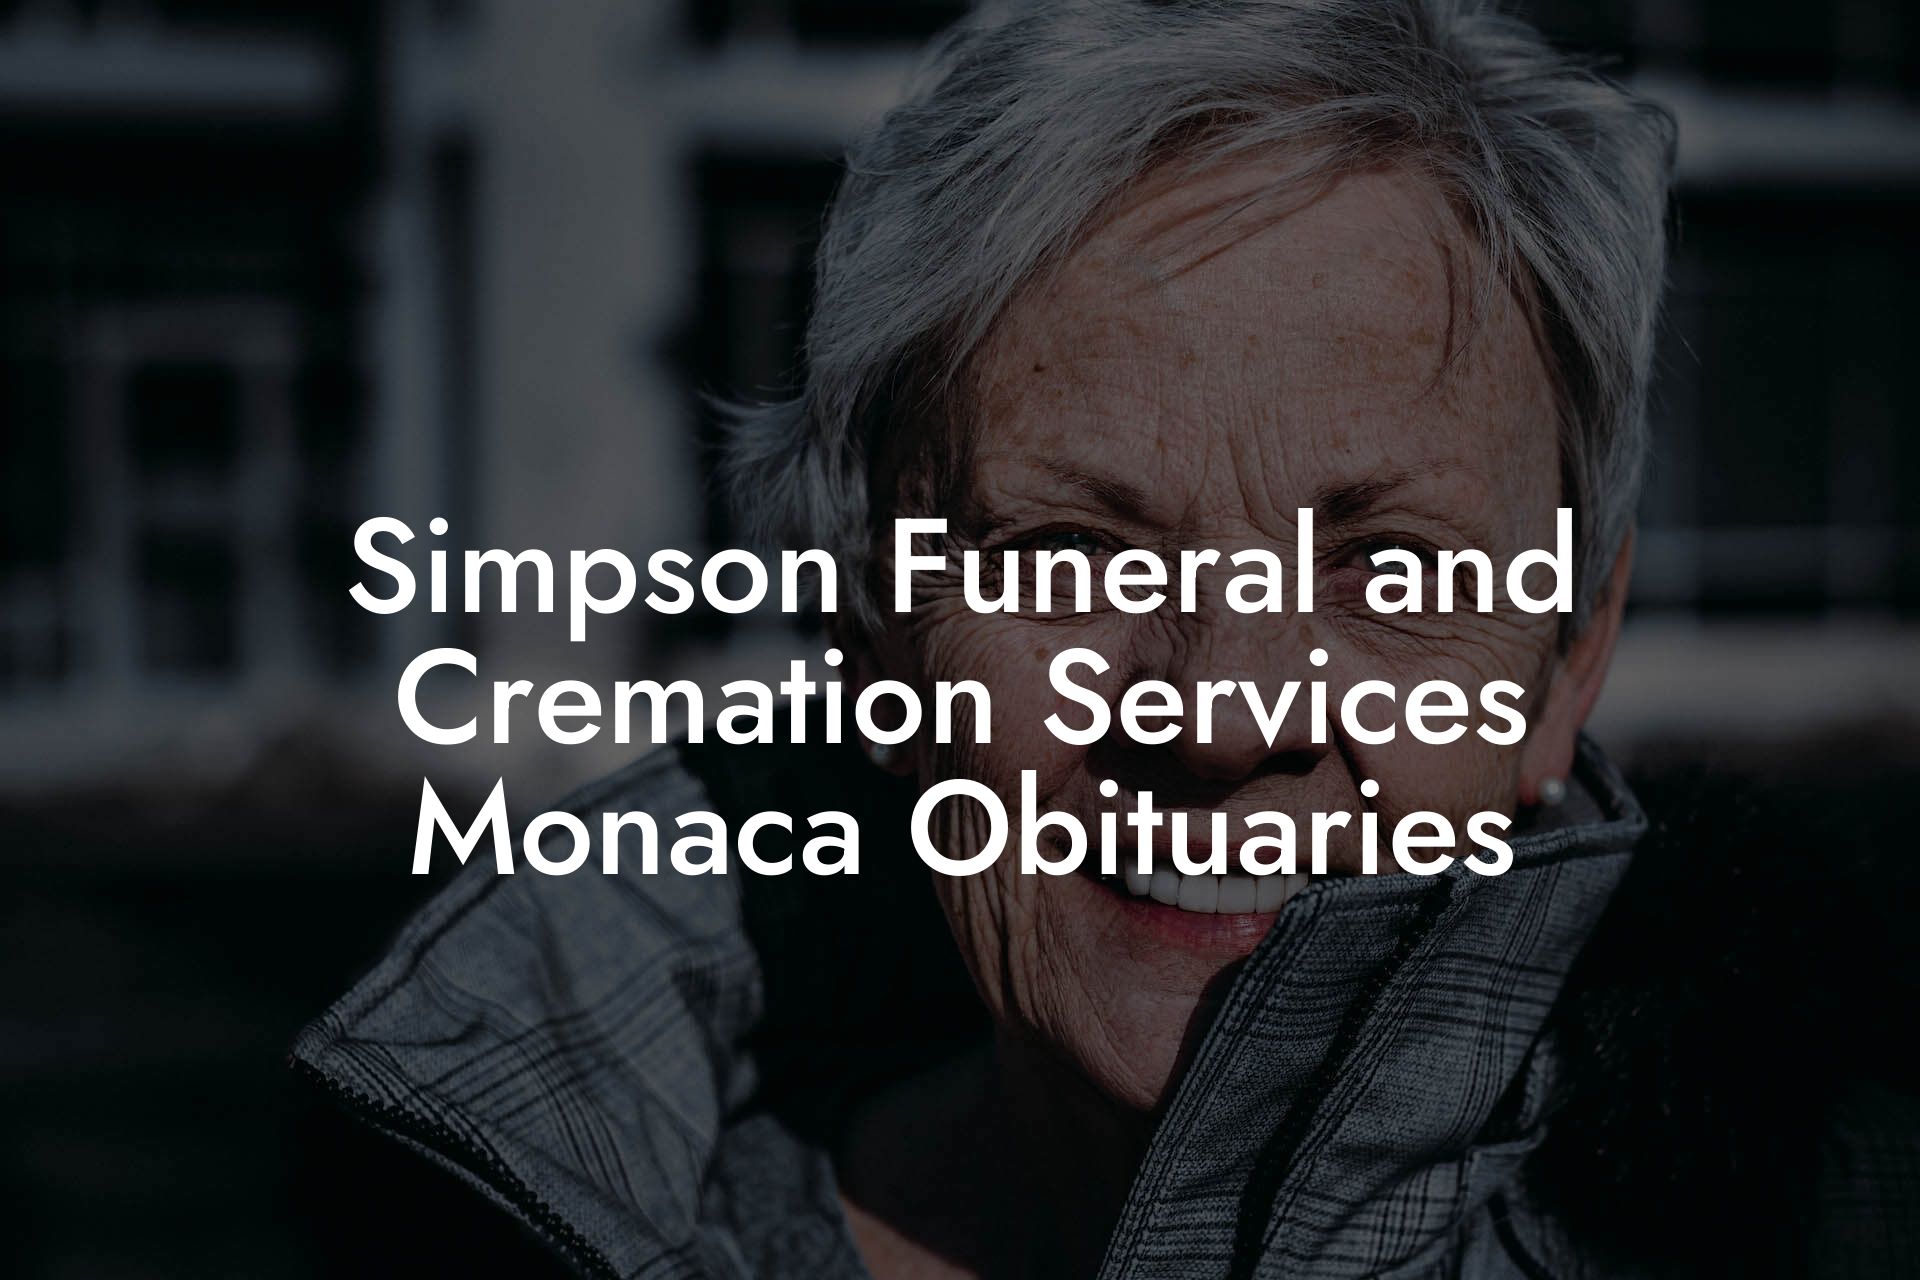 Simpson Funeral and Cremation Services Monaca Obituaries